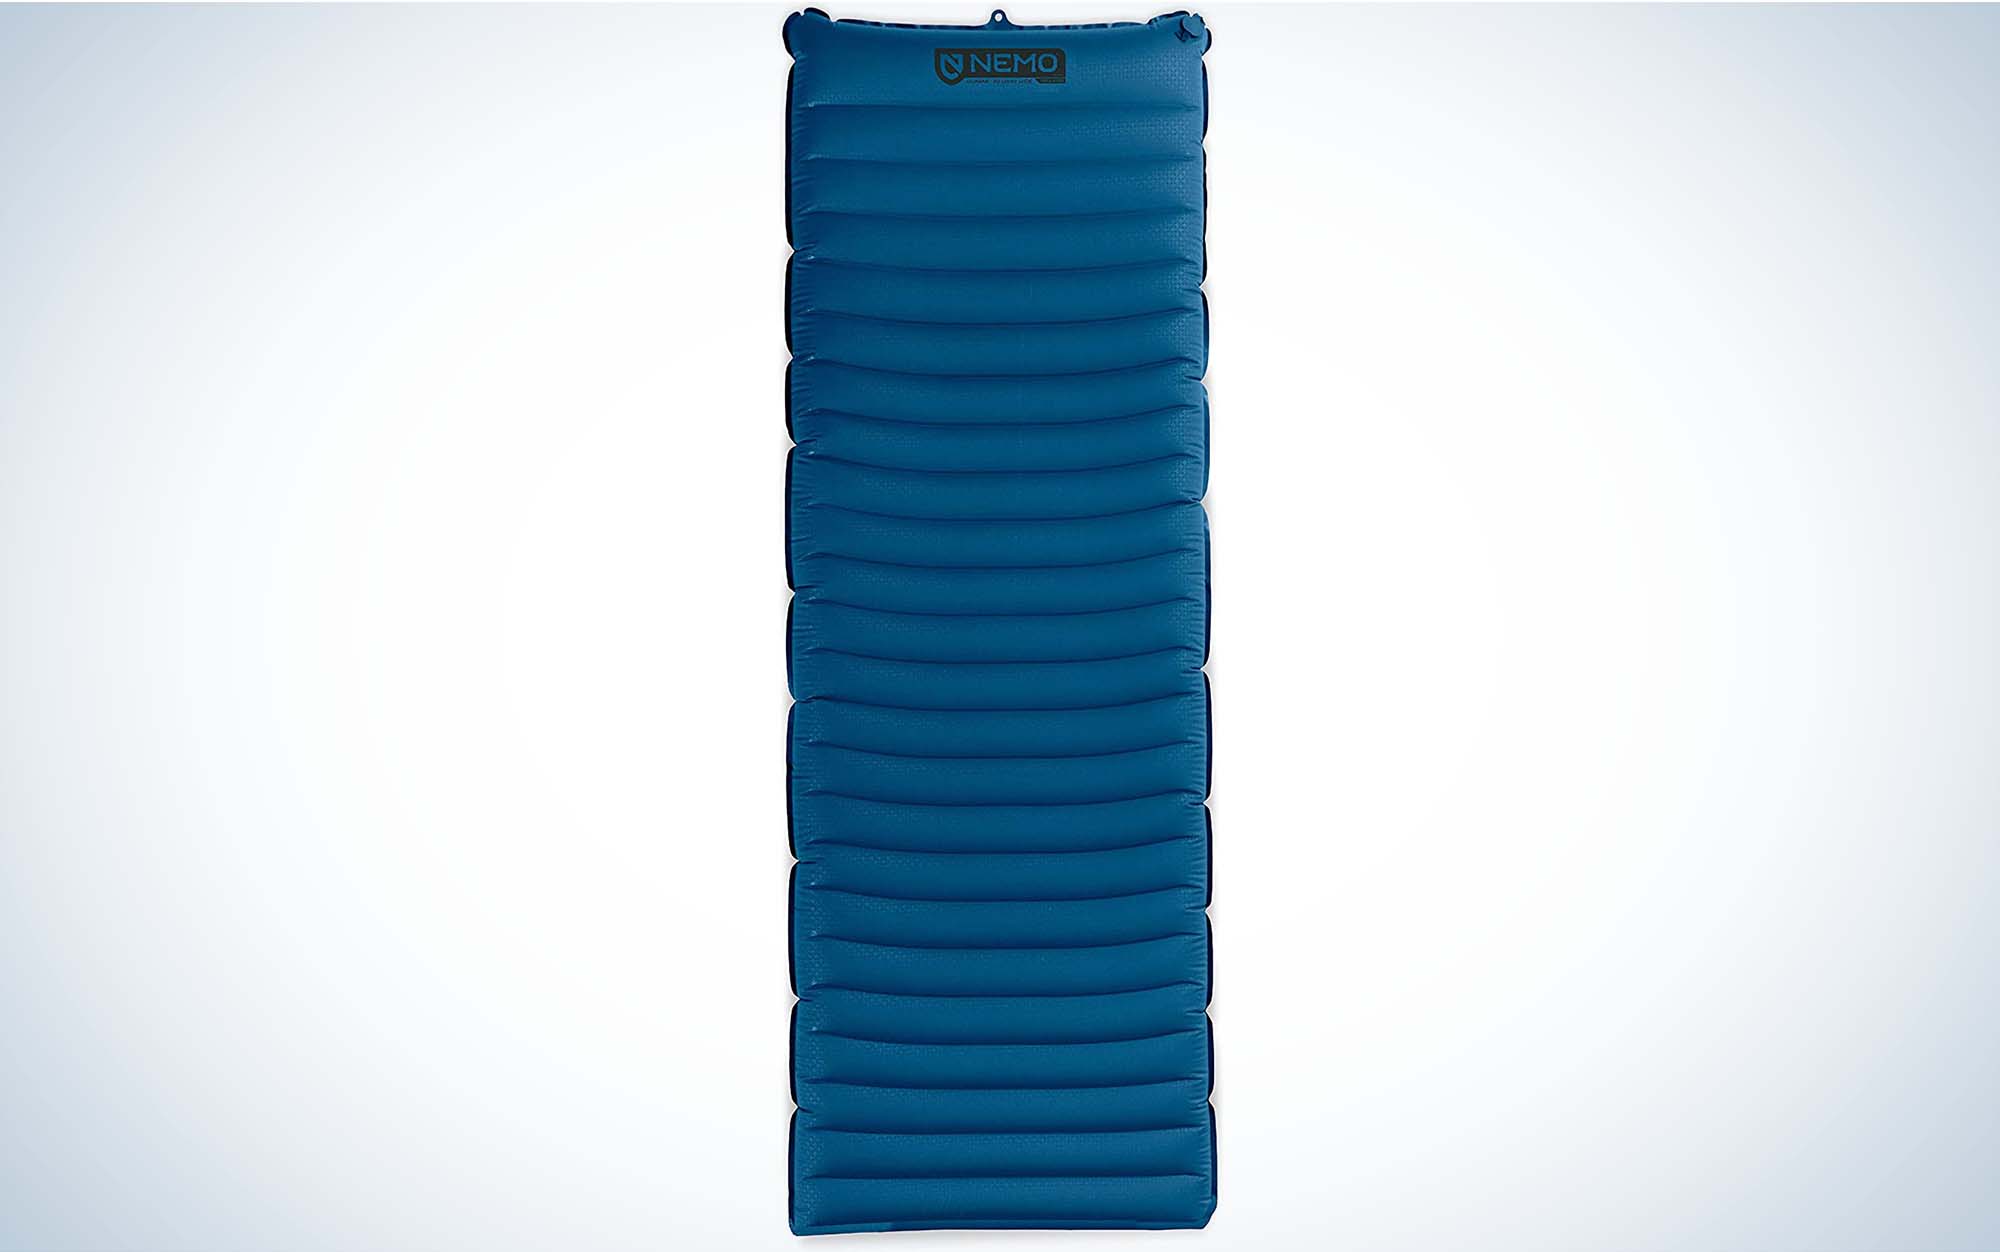 The Nemo Quasar 3D Insulated Sleeping Pad in blue.